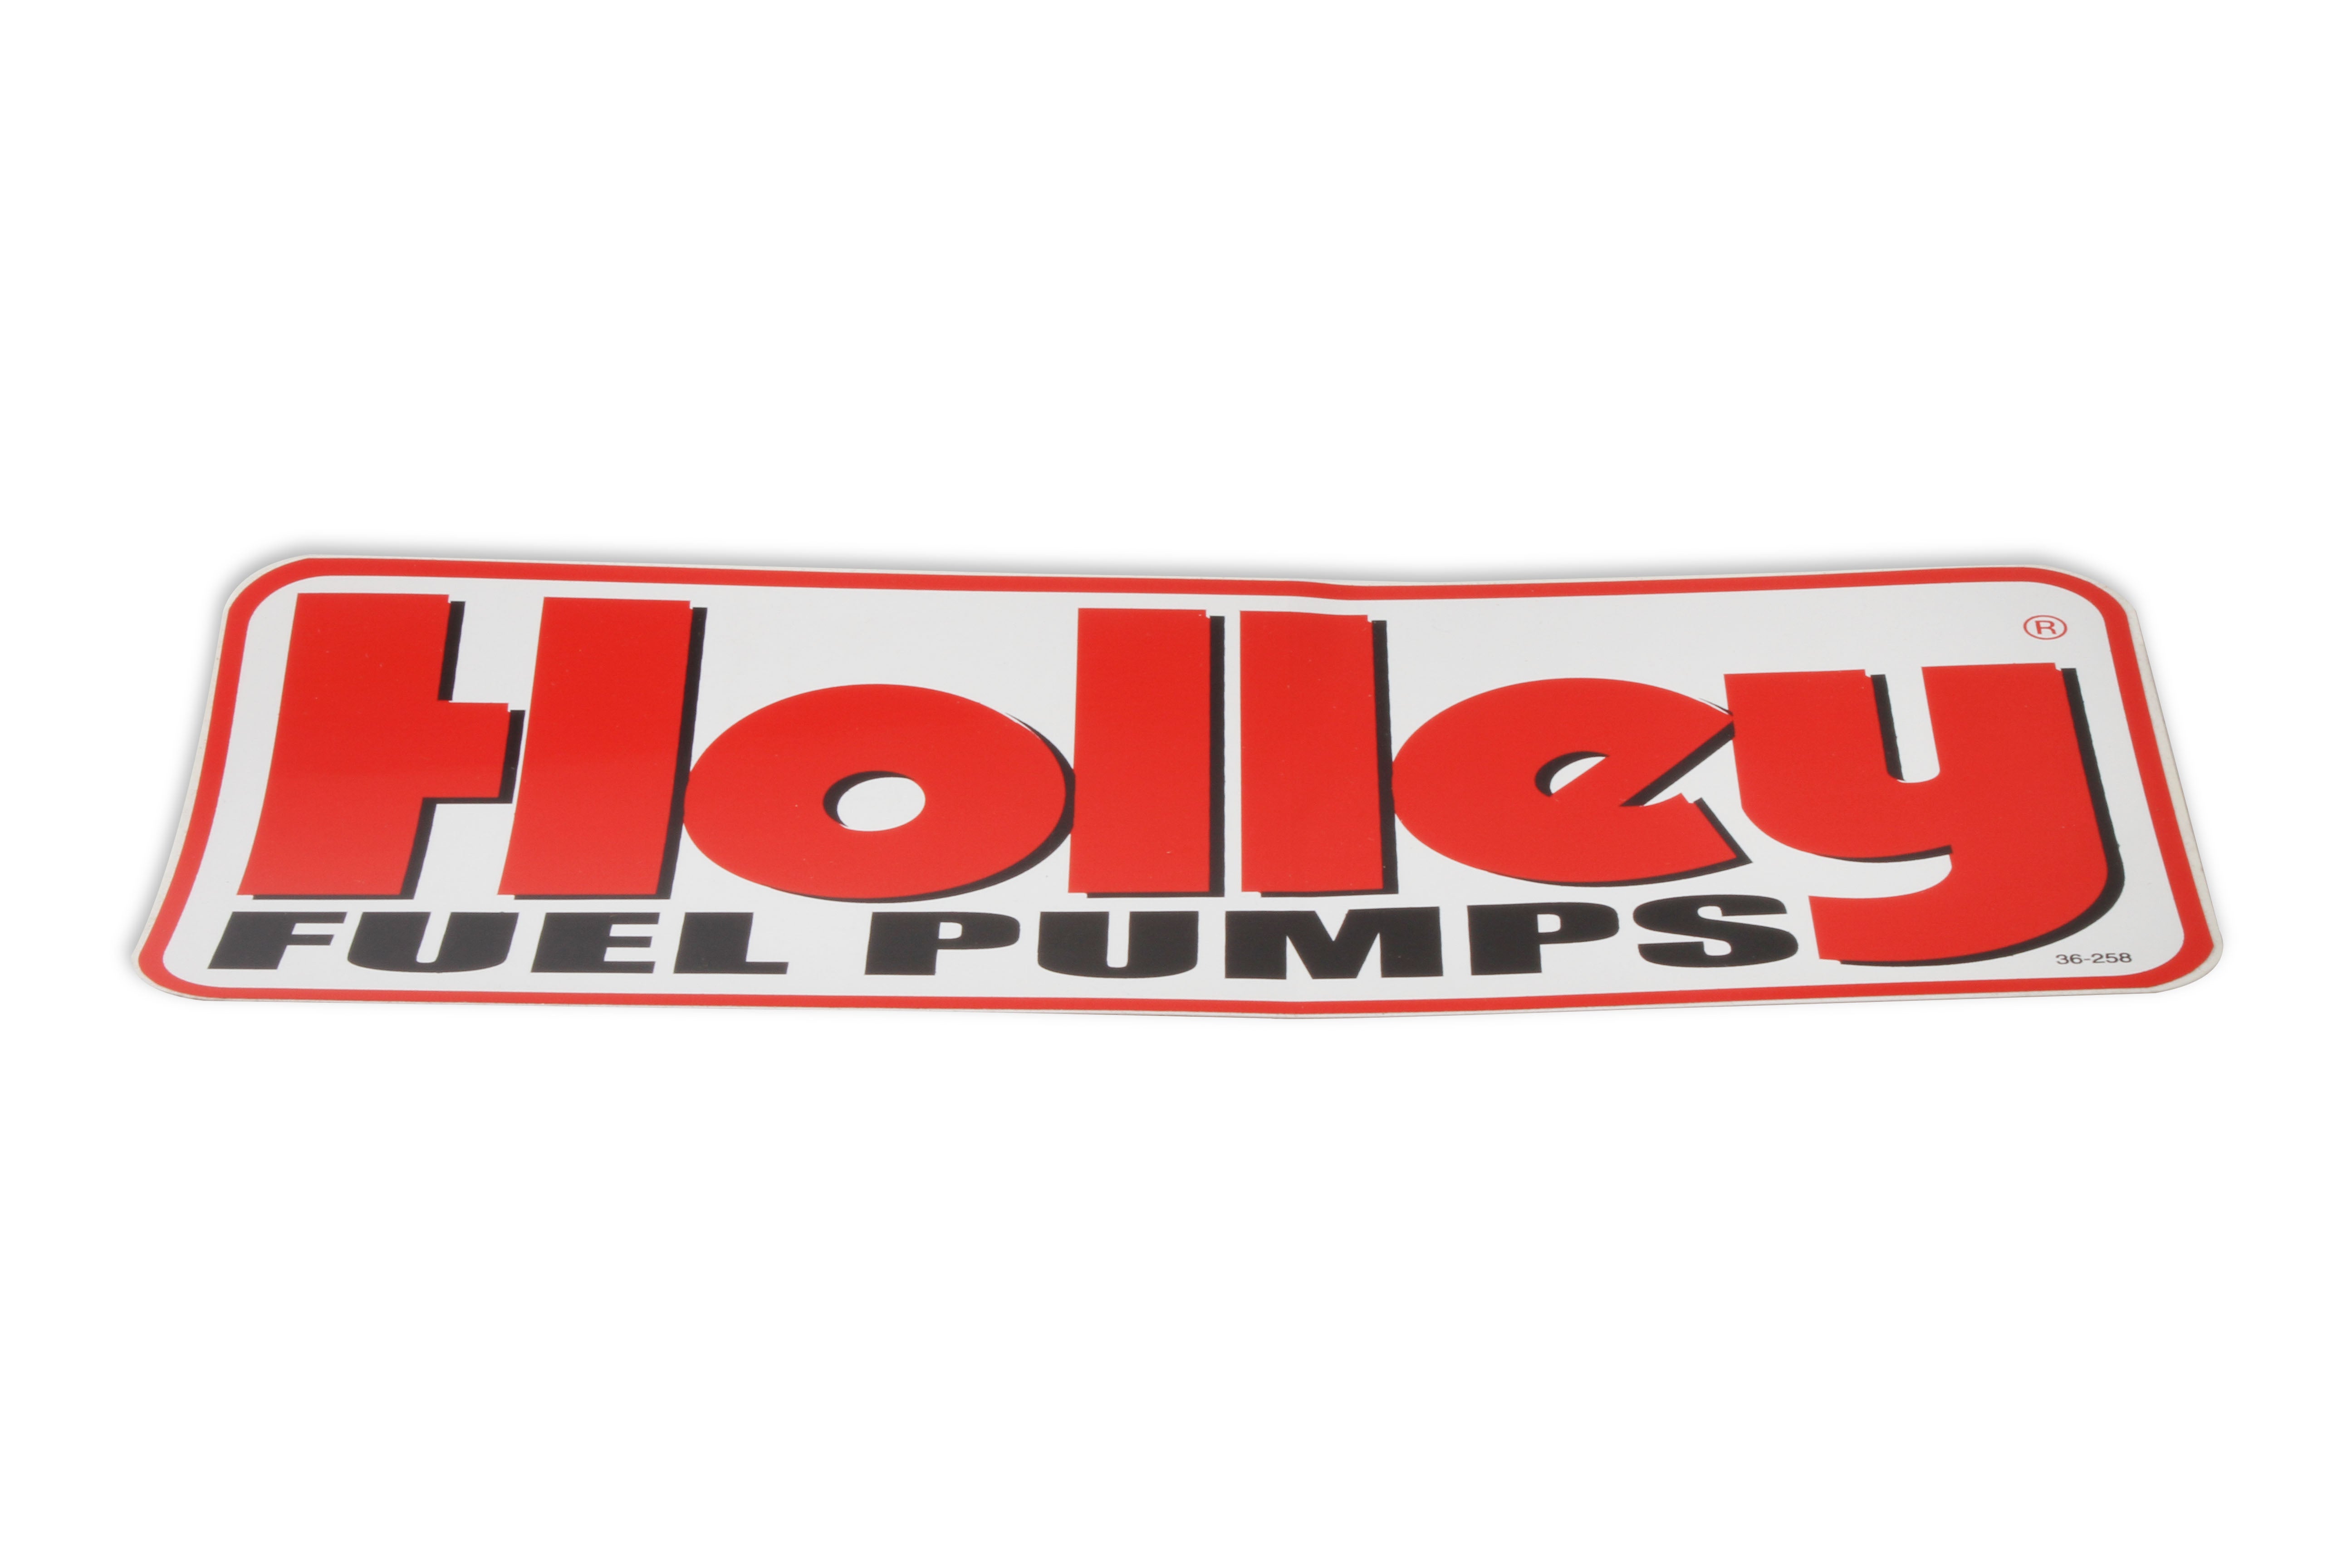 Holley Exterior Decal 36-258